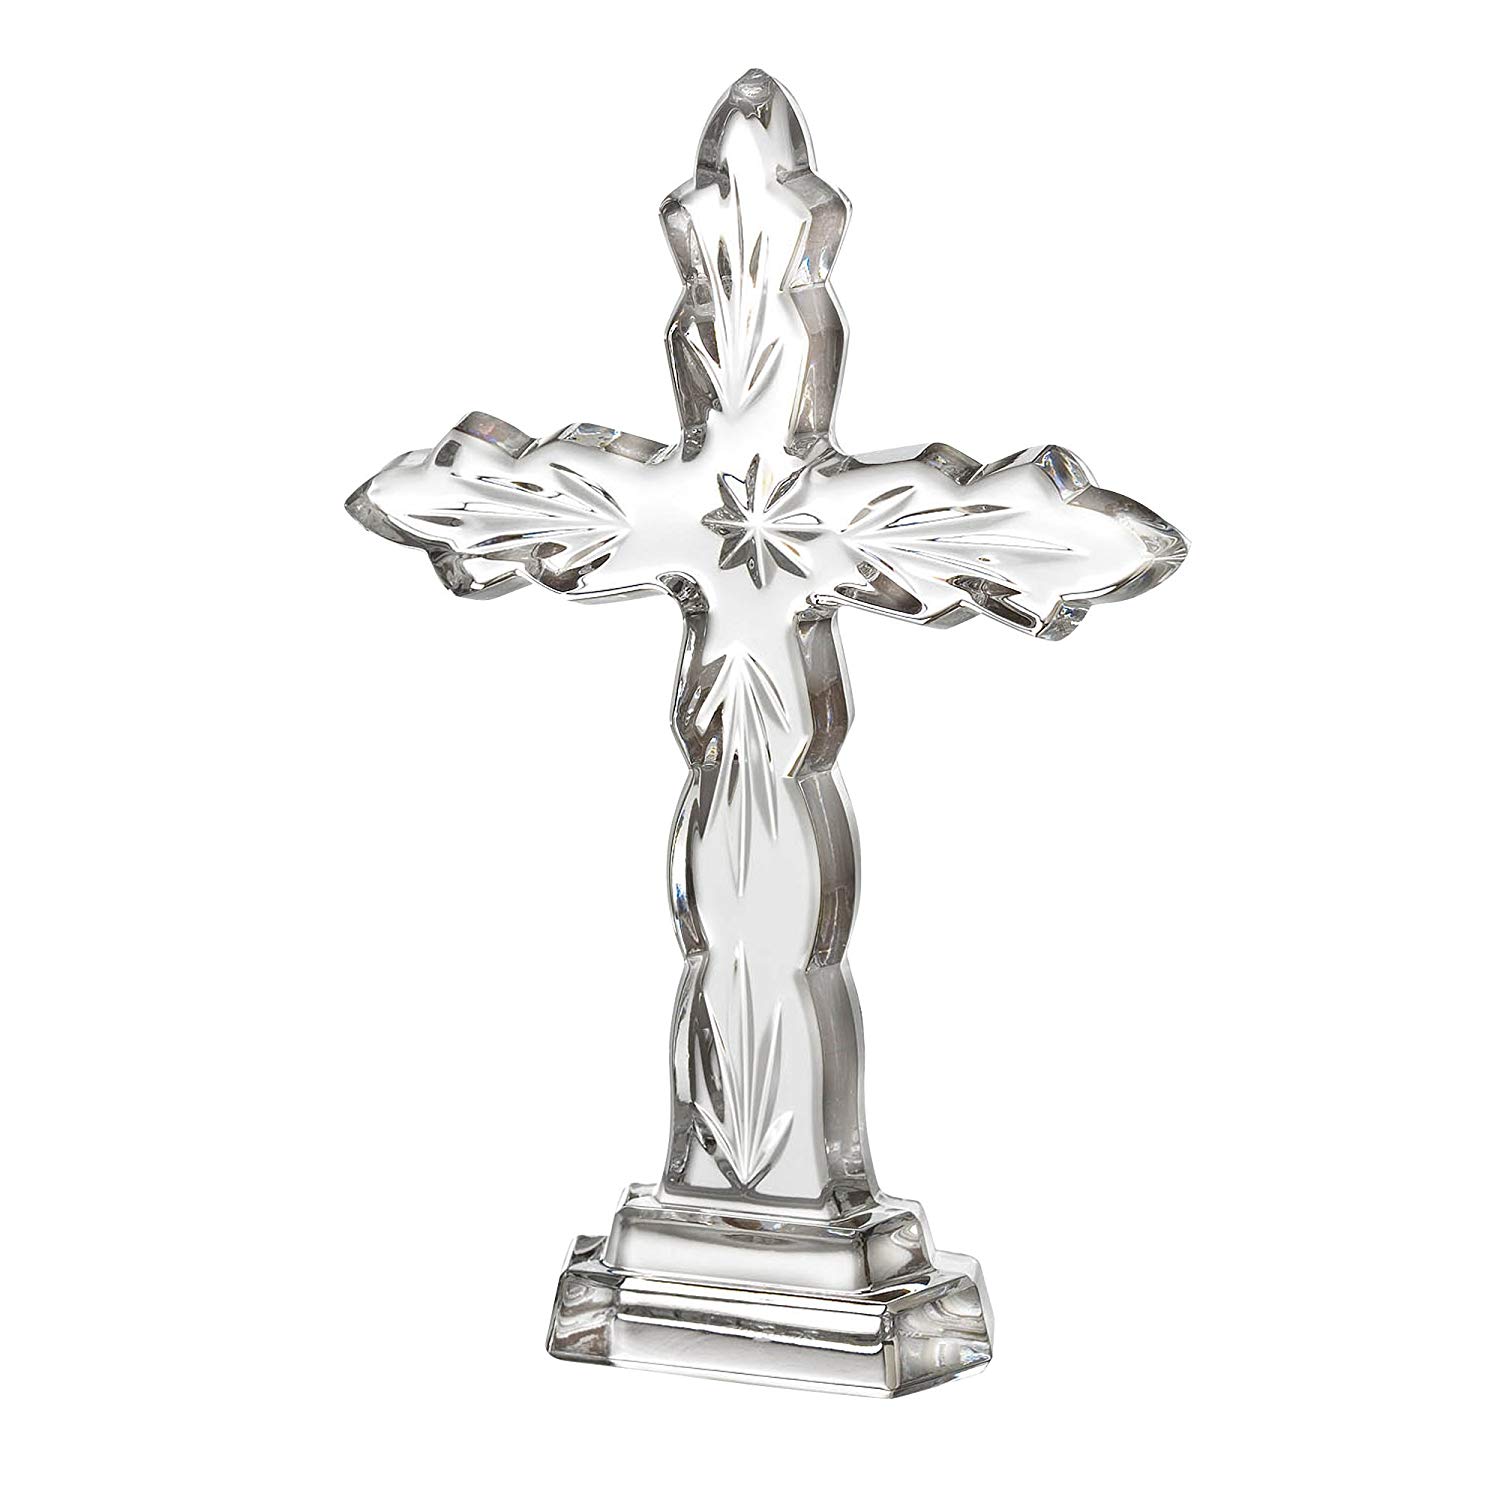 Amazon.com: Waterford Religious 5-1/2-Inch Cross: Home & Kitchen